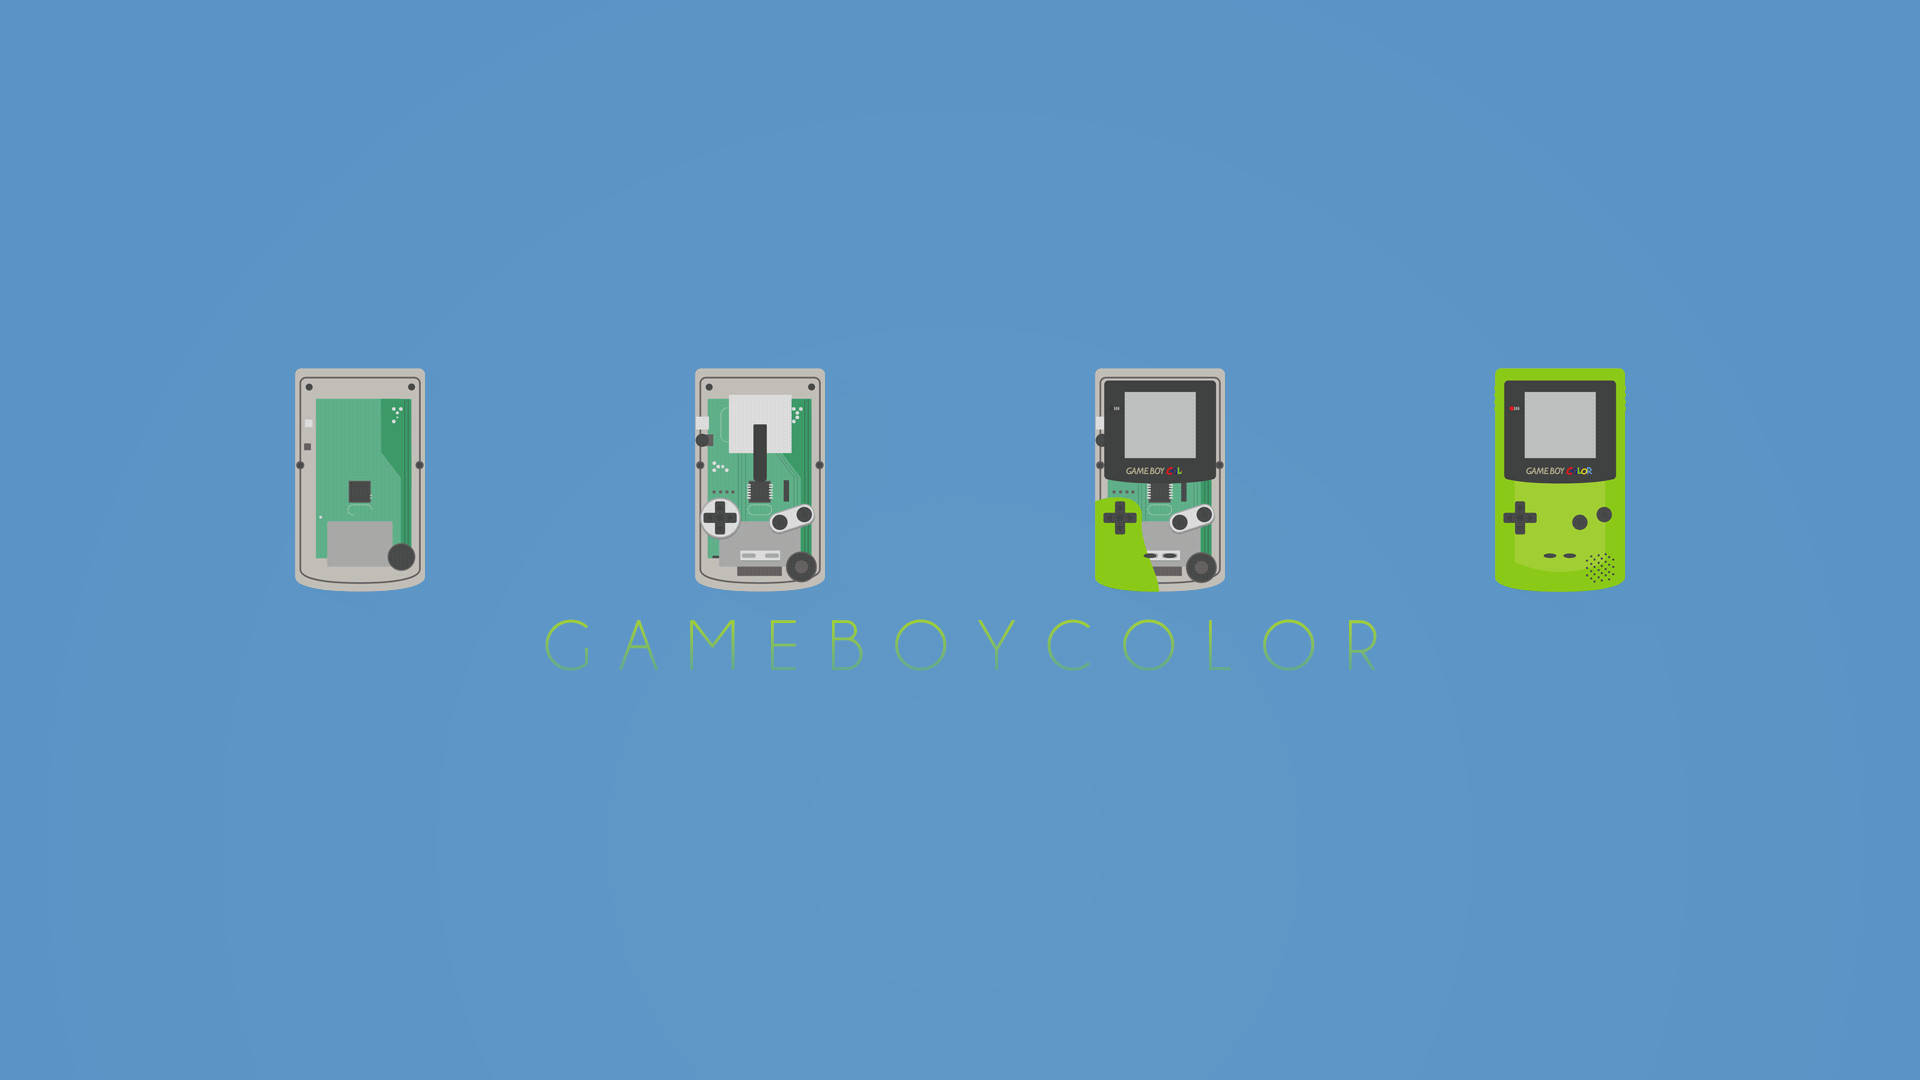 Game Boy Color Step By Step Construction Background